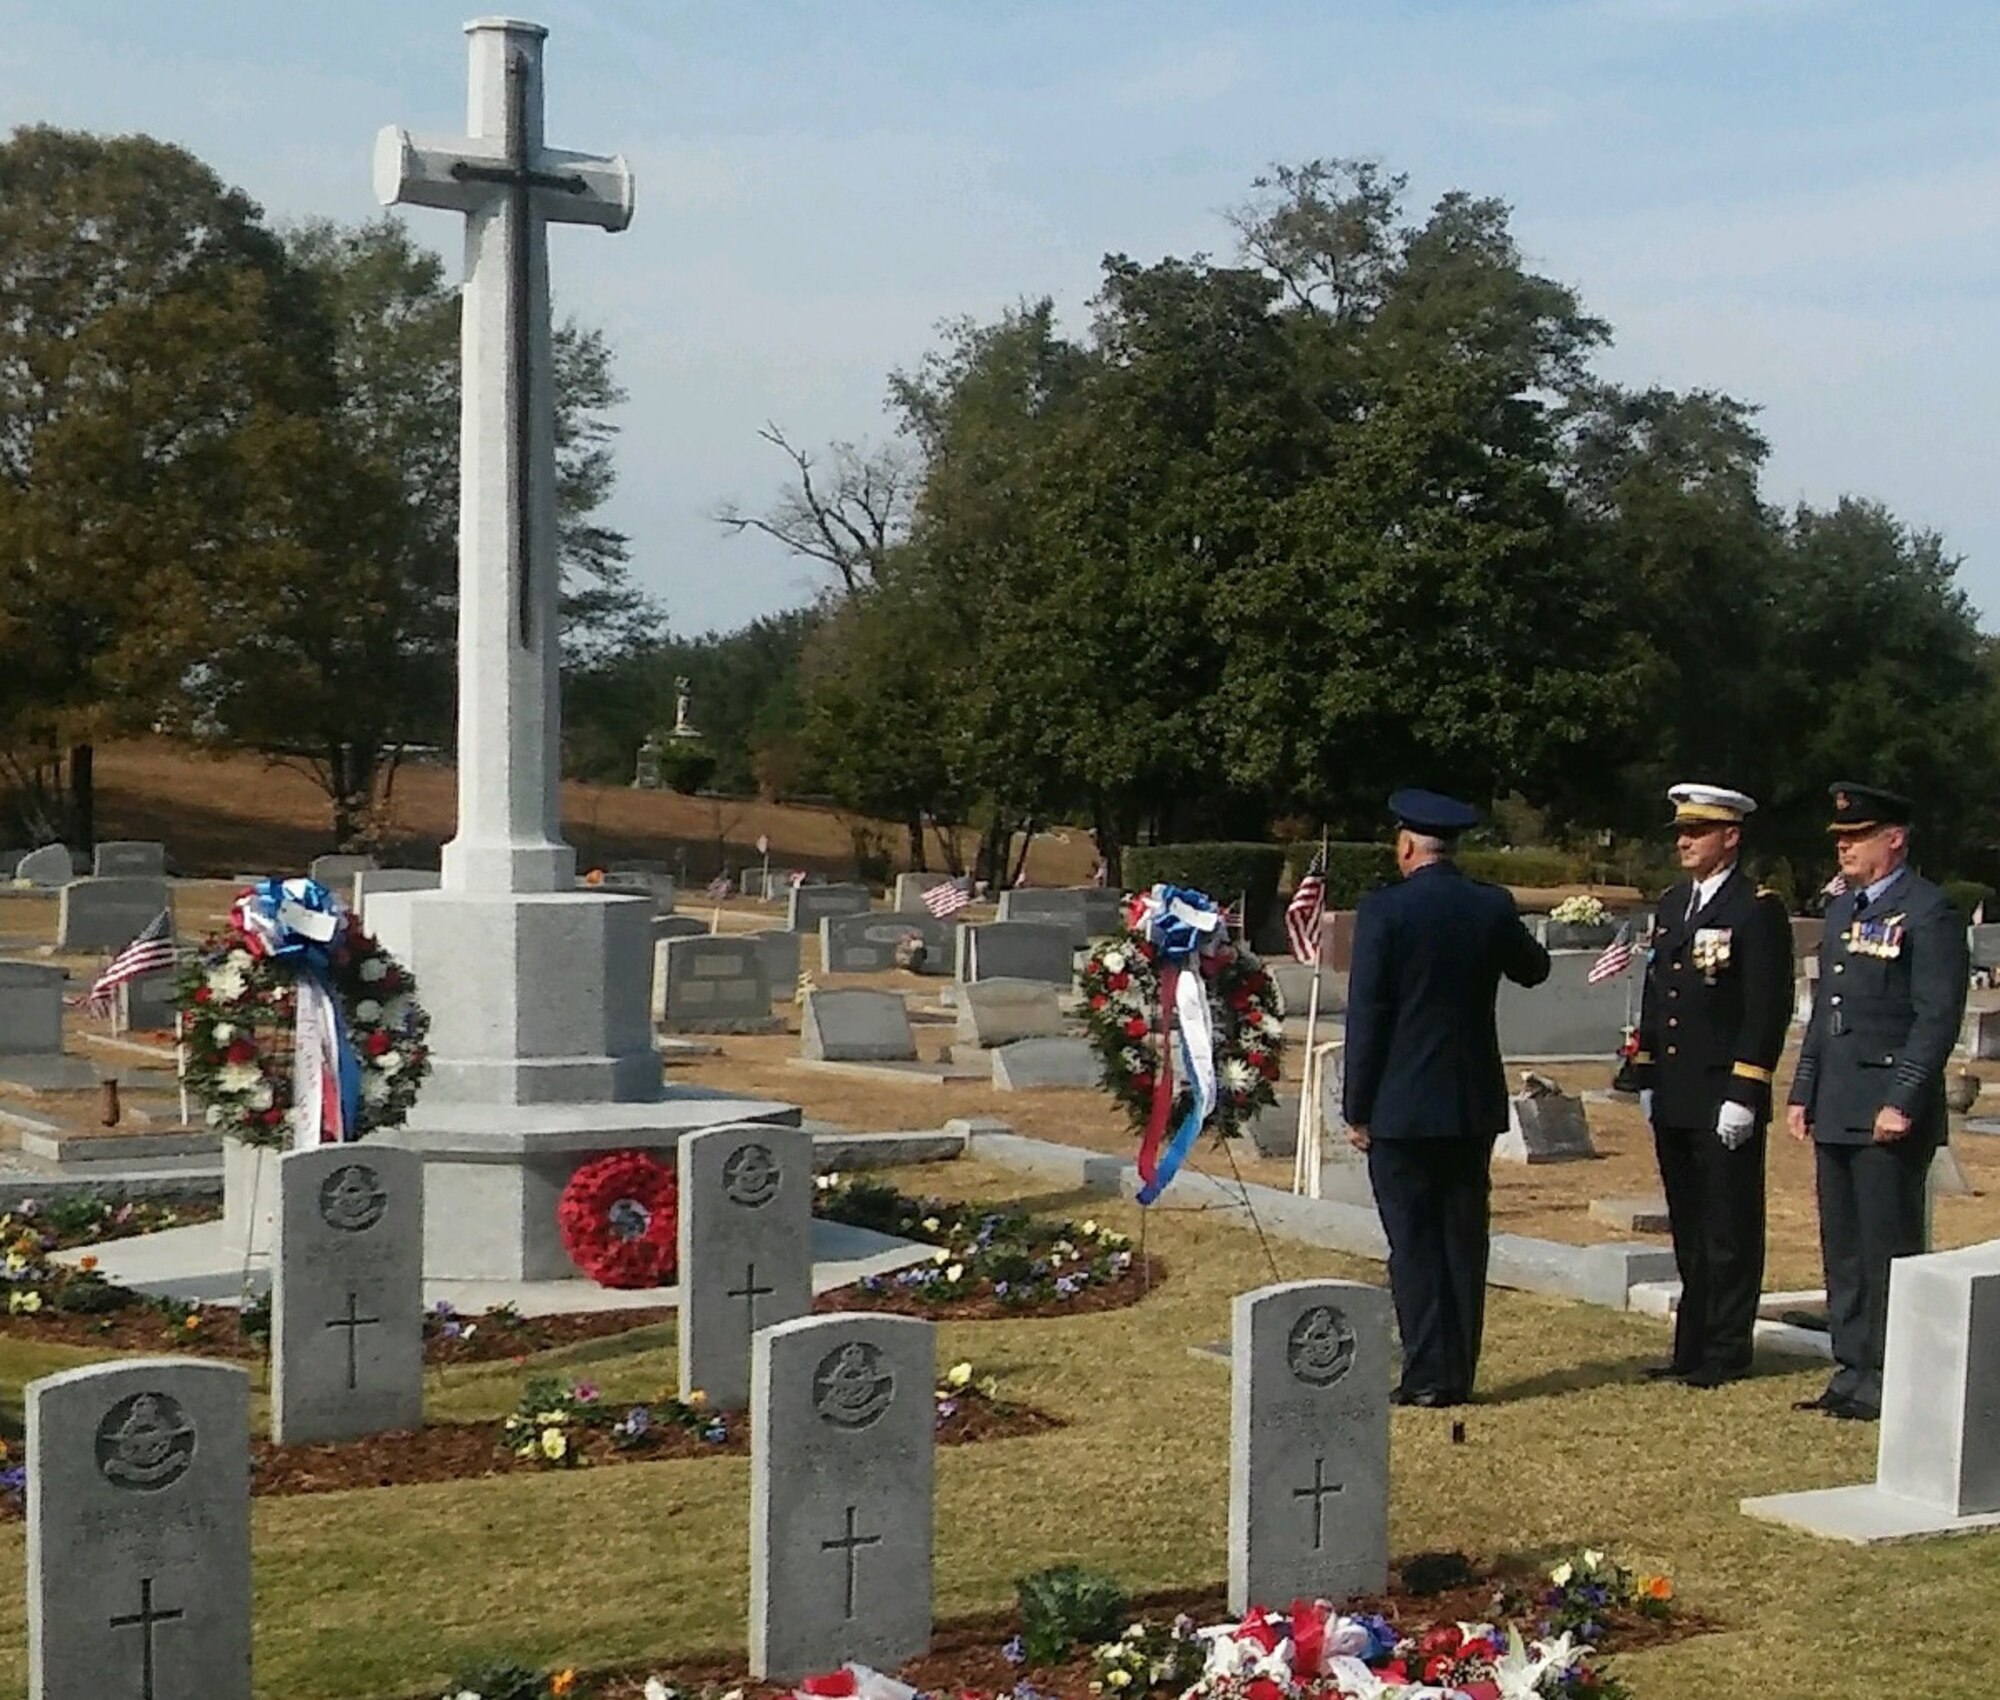 Brig. Gen. Christopher A. Coffelt, commandant, Air War College, salutes facing the Cross of Sacrifice with French Air Force Lieutenant Colonel Fabrice Imbo and RAF Group Captain Paul Taylor Nov. 13, 2016, at Oakwood Cemetery, Montgomery Alabama.  In the cemetery are buried 78 British and 20 French Airmen killed in training accidents in the Southeast U.S. from June 1941 to November 1945. (Photo courtesy of Dr. Robert Kane, Air University Director of History)